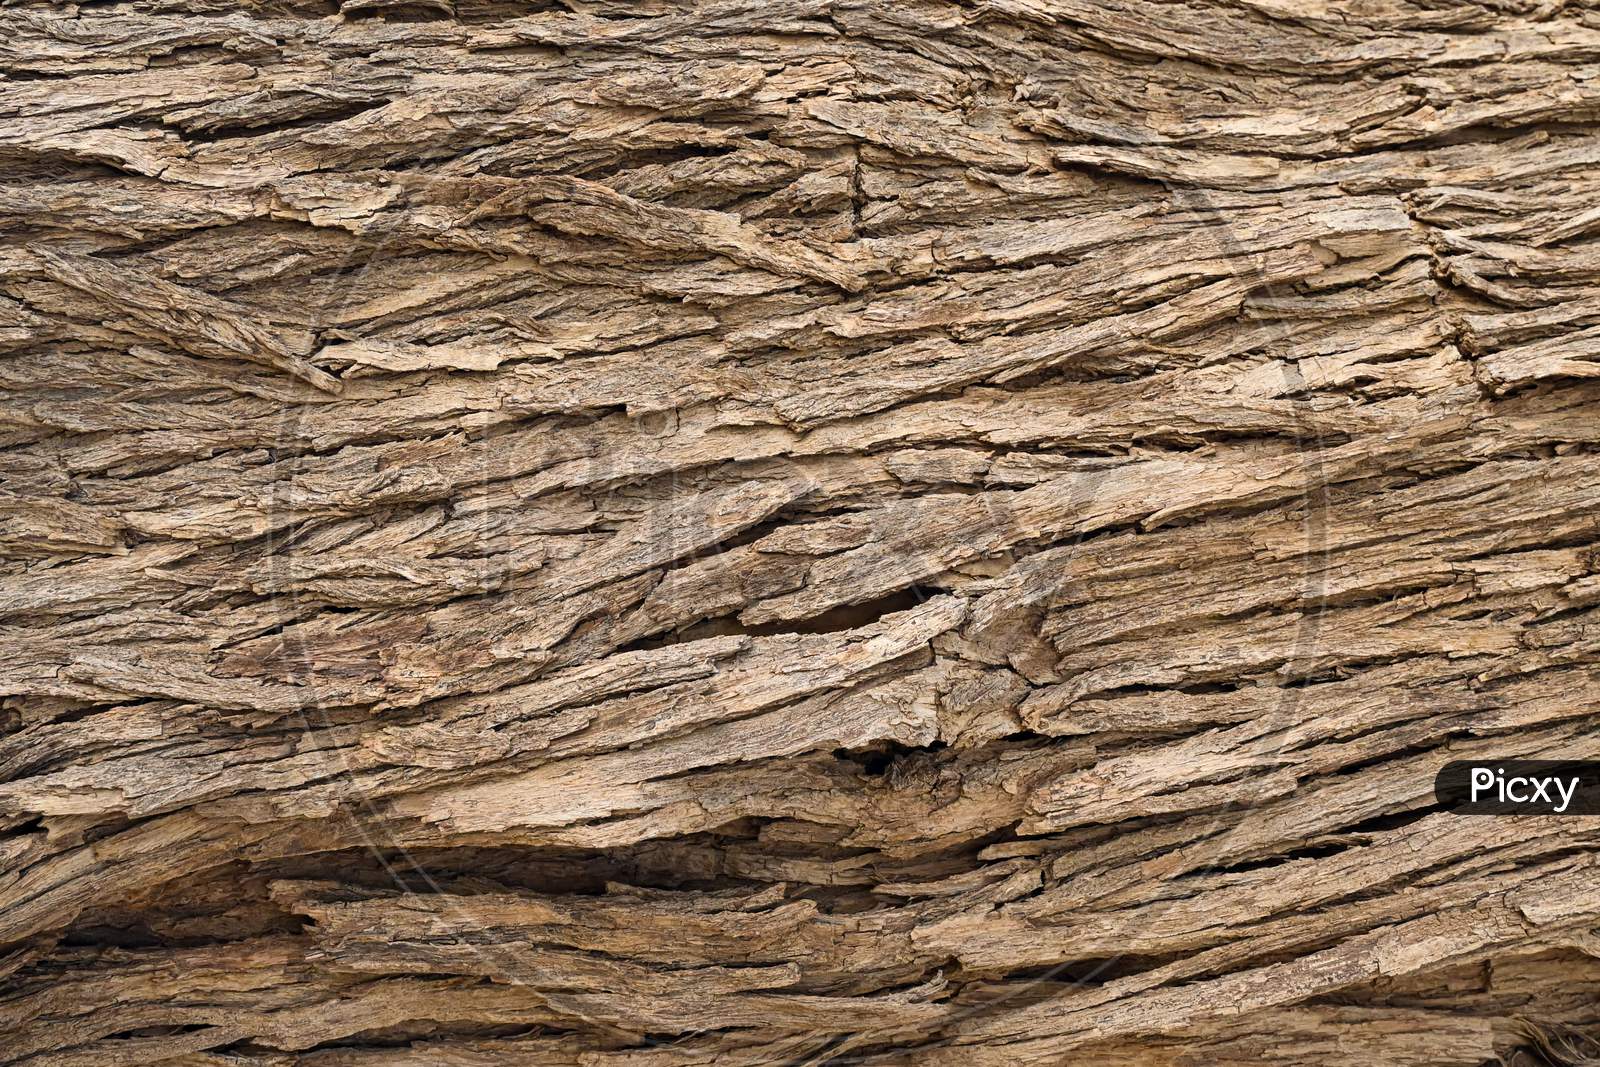 Tree Bark Texture, After Drying The Wood Tree Skin